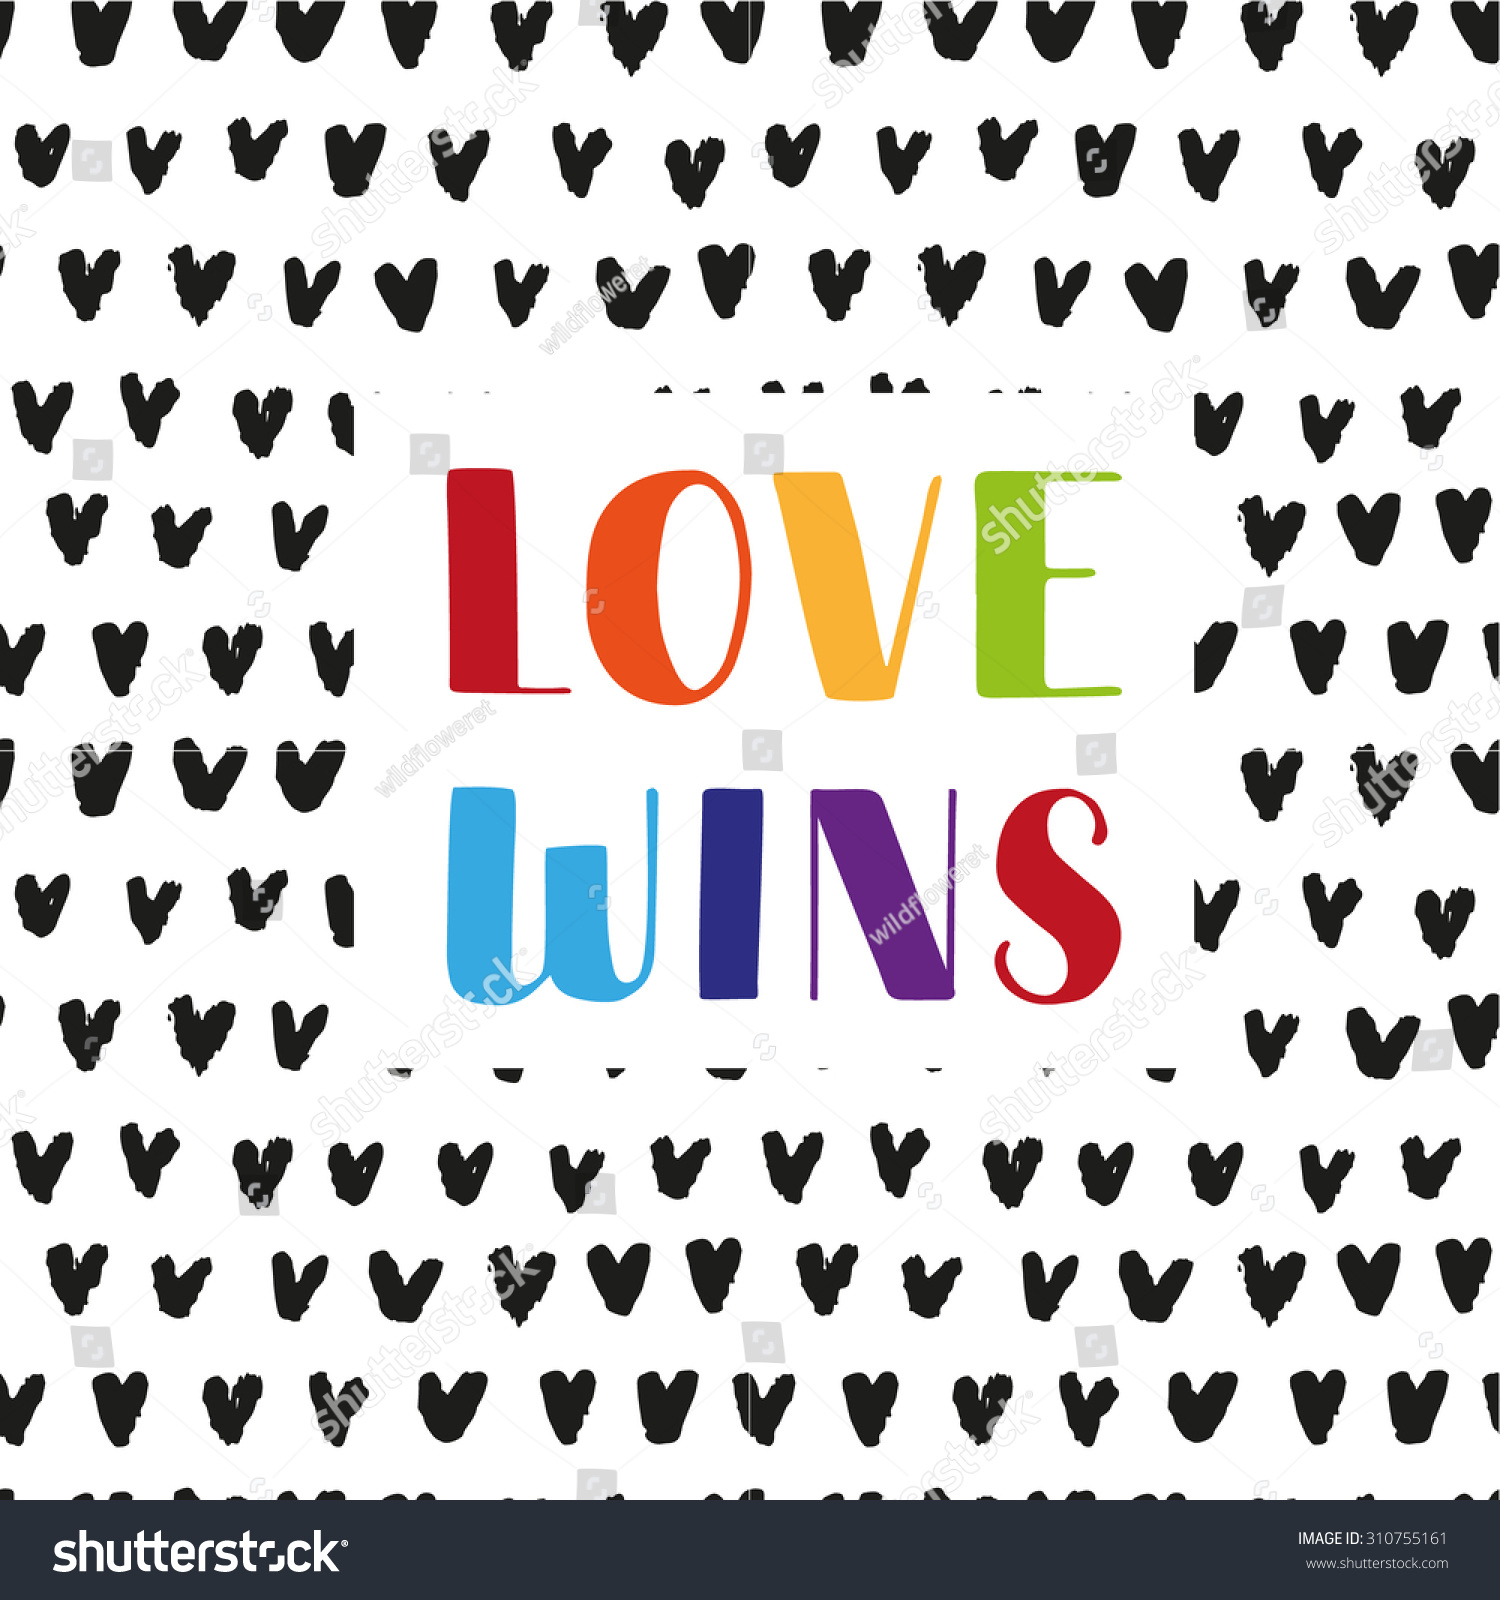 Download Love Wins Hand Drawn Background Your Stock Vector (Royalty Free) 310755161 - Shutterstock